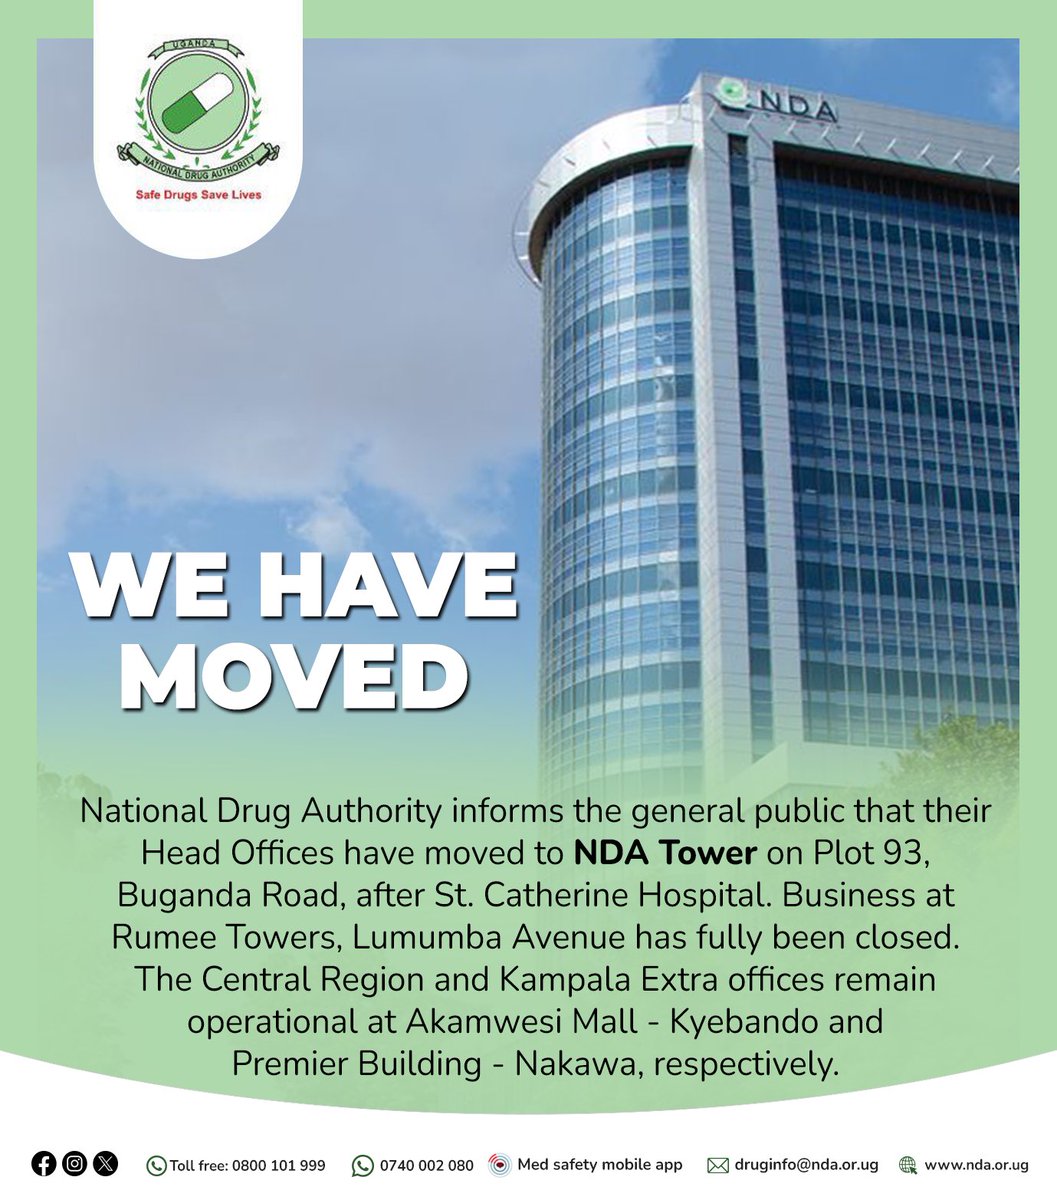 We delighted to share with you that as come closer to end of 2023, our headquarters will return to our permanent home on Plot 93, Buganda Road. Our businesses on Rumee Towers - Lumumba Avenue will cease effective today December 15th 2023.